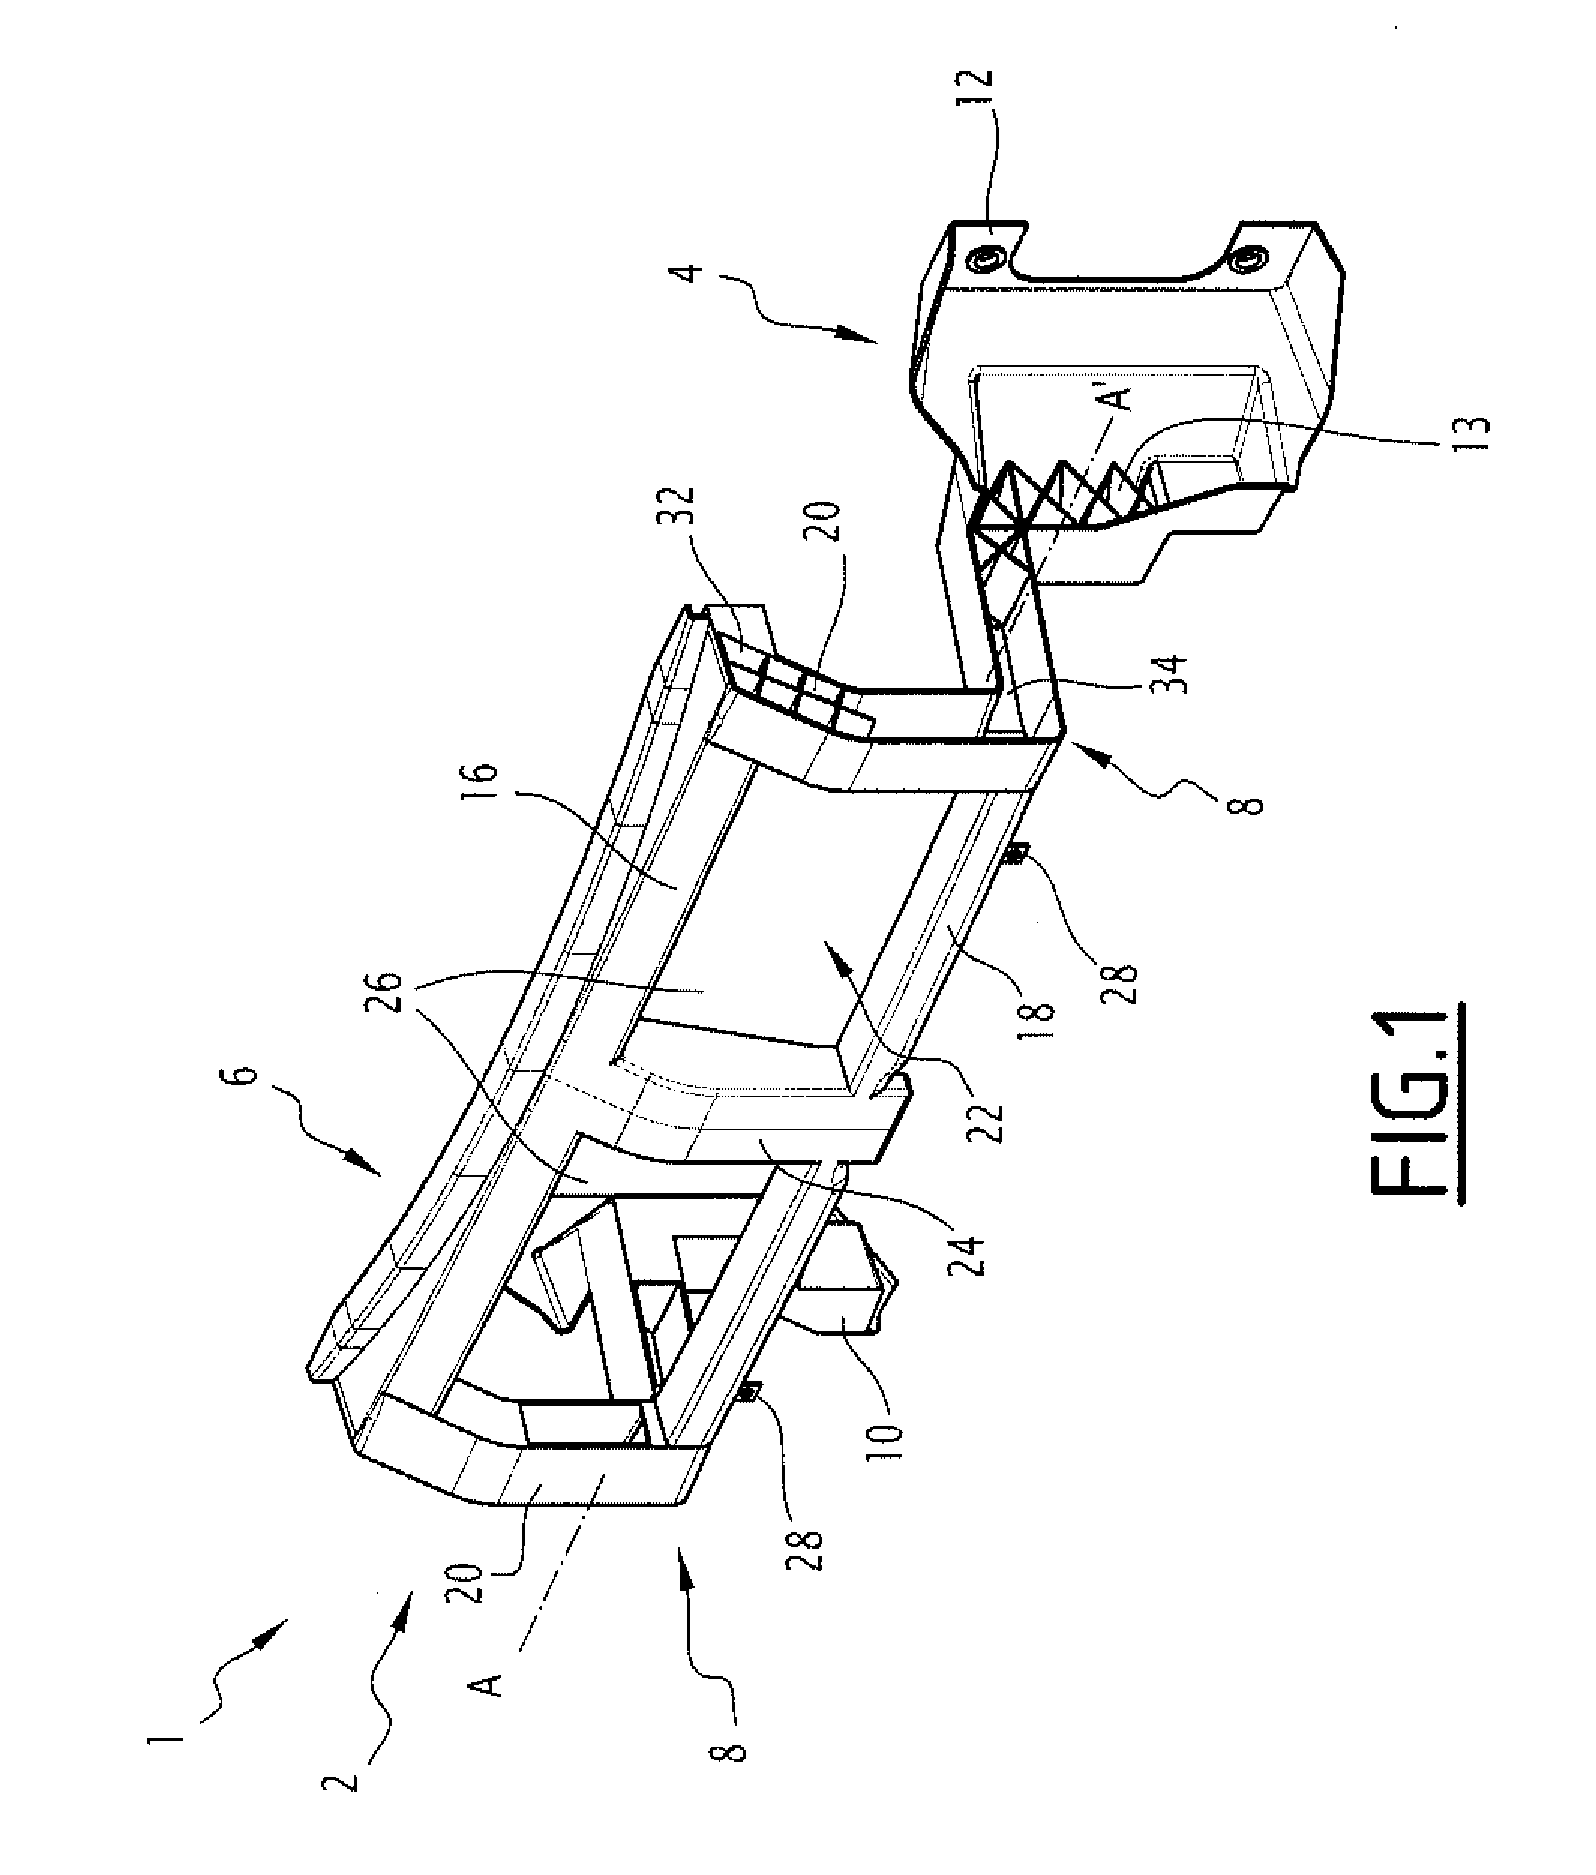 Motor-vehicle front-face module comprising a flexible zone